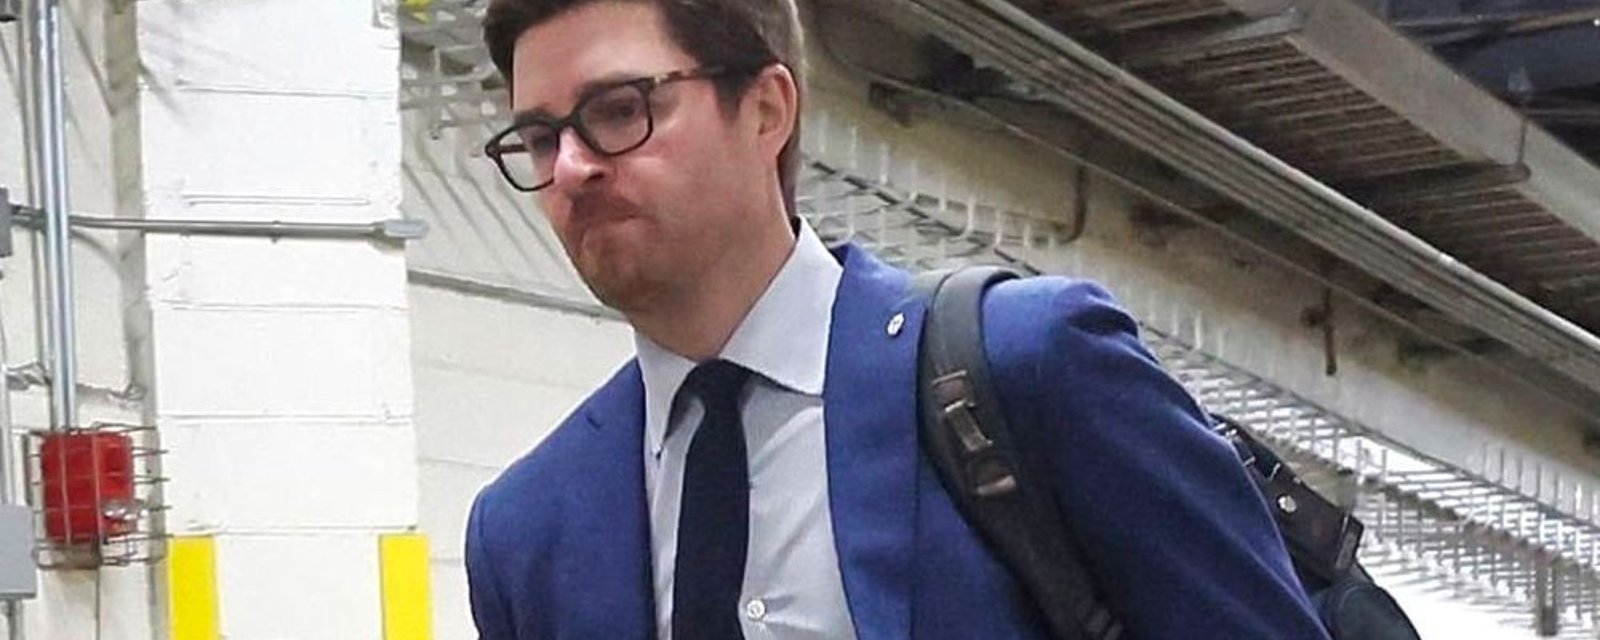 Dubas leaks confidential information about Leafs and fans are not happy